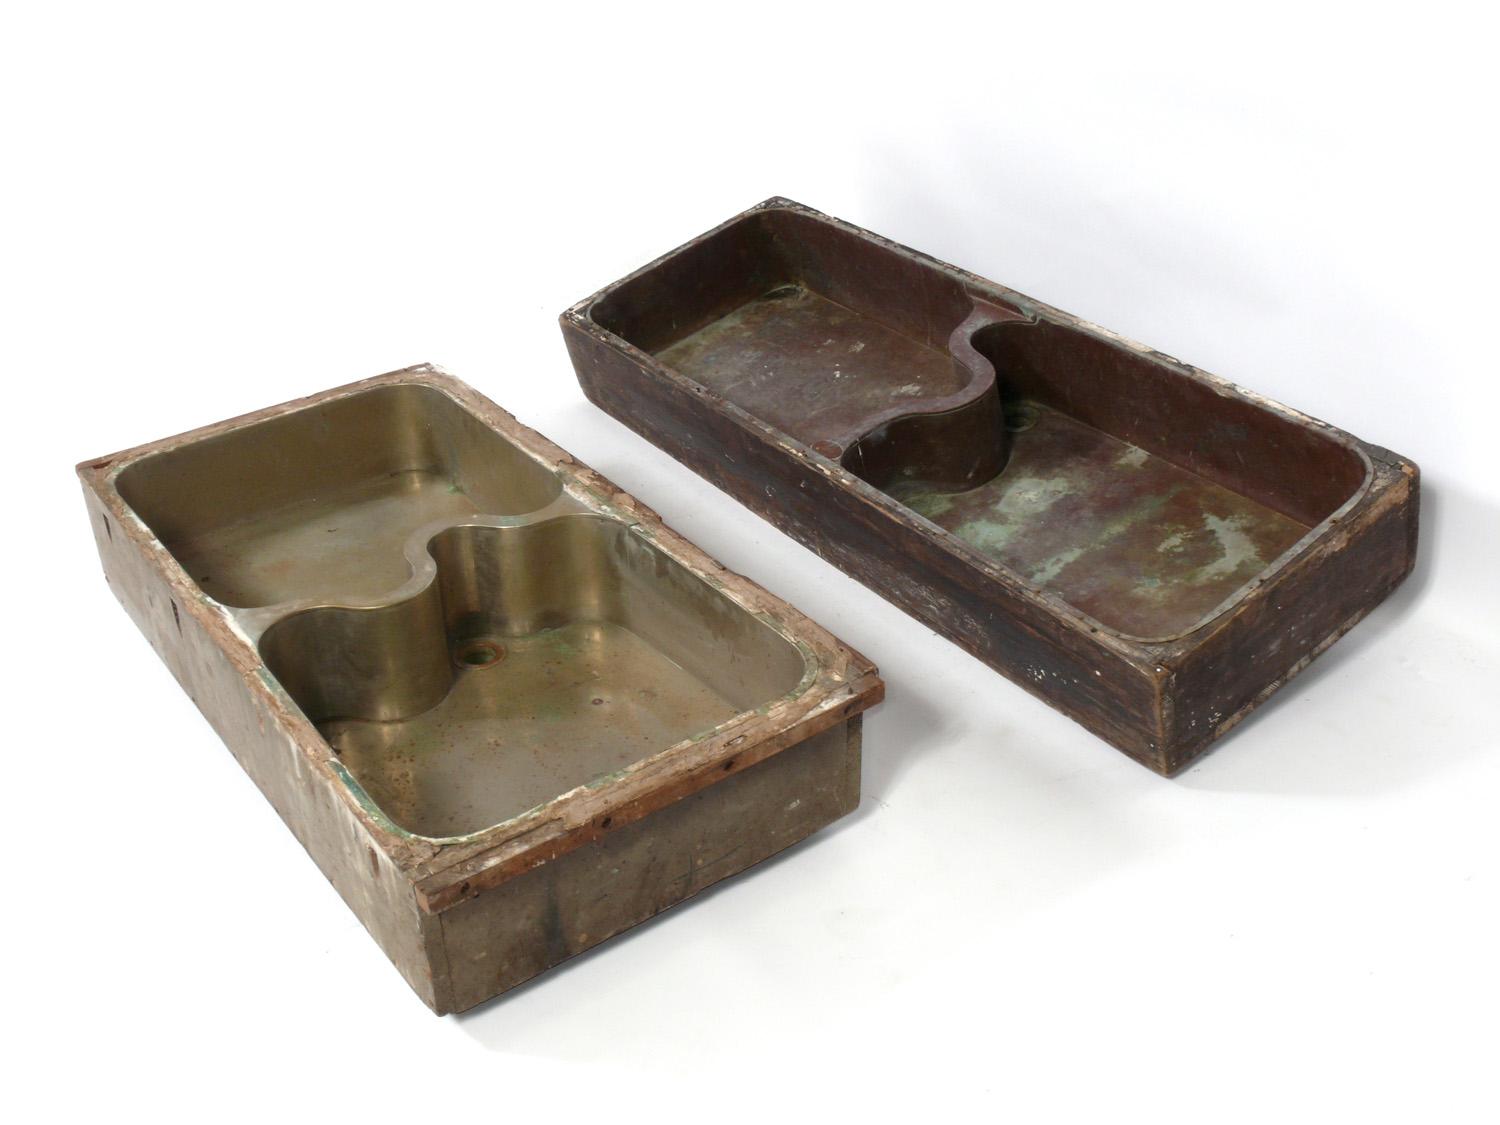 Selection of Industrial Art Deco Sinks, design attributed to Donald Deskey, American, circa 1930s. Deskey used this design of sink in one of his most famous interiors, the Mandel House, where he designed all of the interior furnishings and Edward